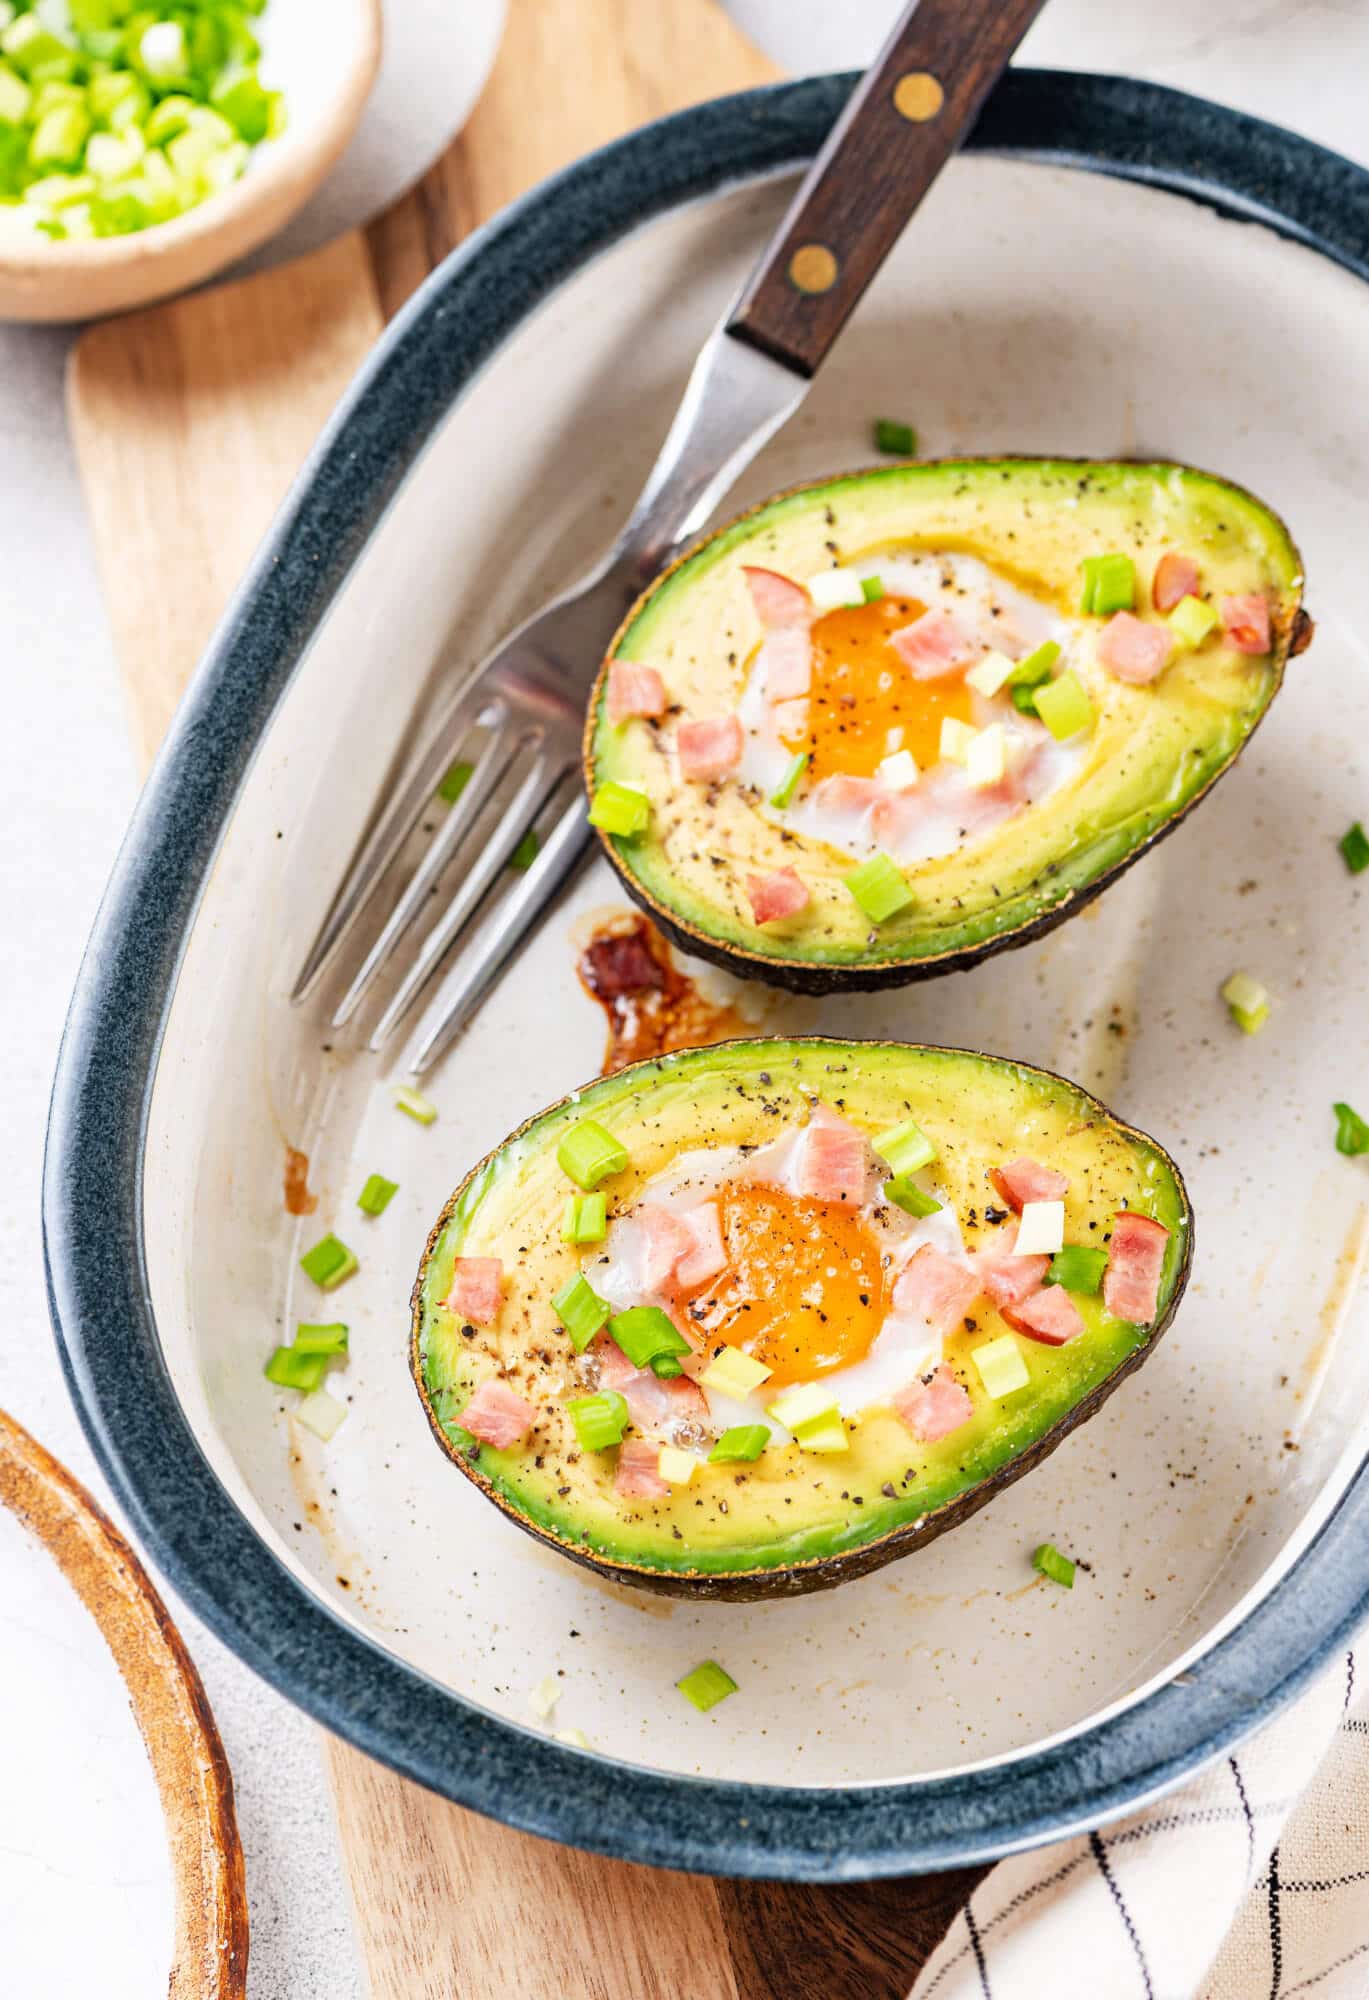 Baked avocado with egg in it and topped with bacon bits and green onion in a white baking dish with a silver fork on the side.